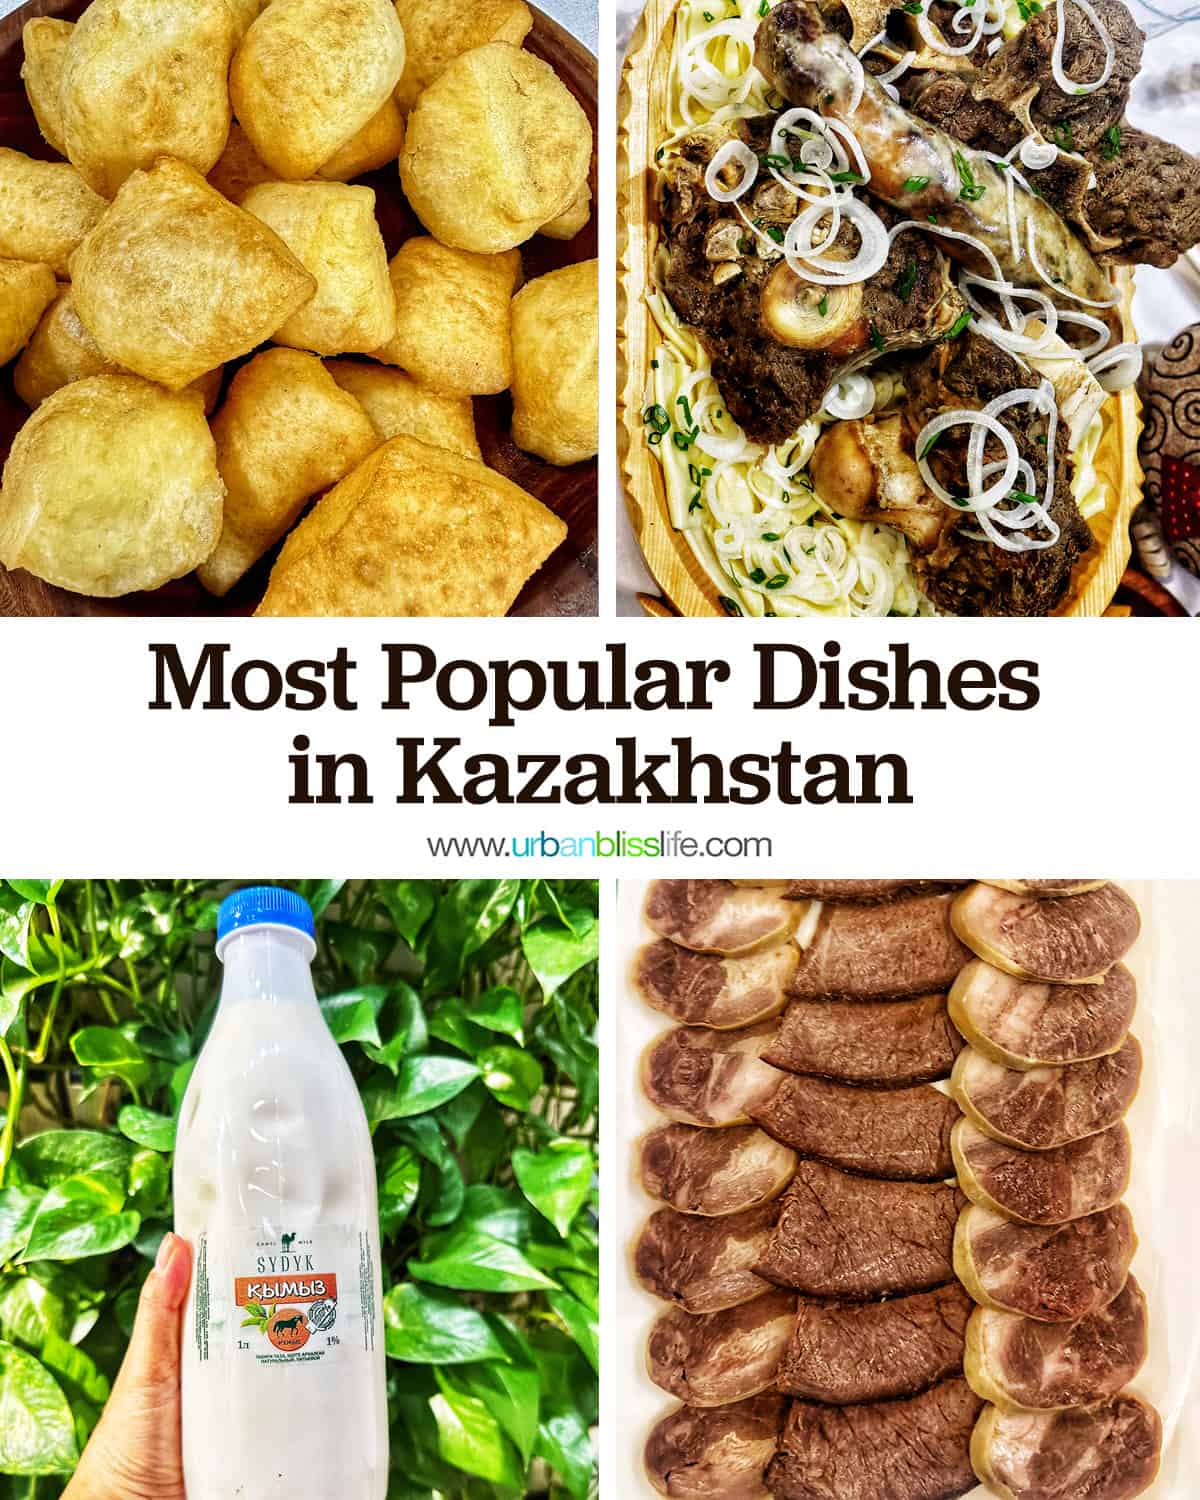 photos of baursak, beshbarmak, camel's milk, and kazy horse meat sausage with title text that reads "Most Popular Dishes in Kazakhstan."